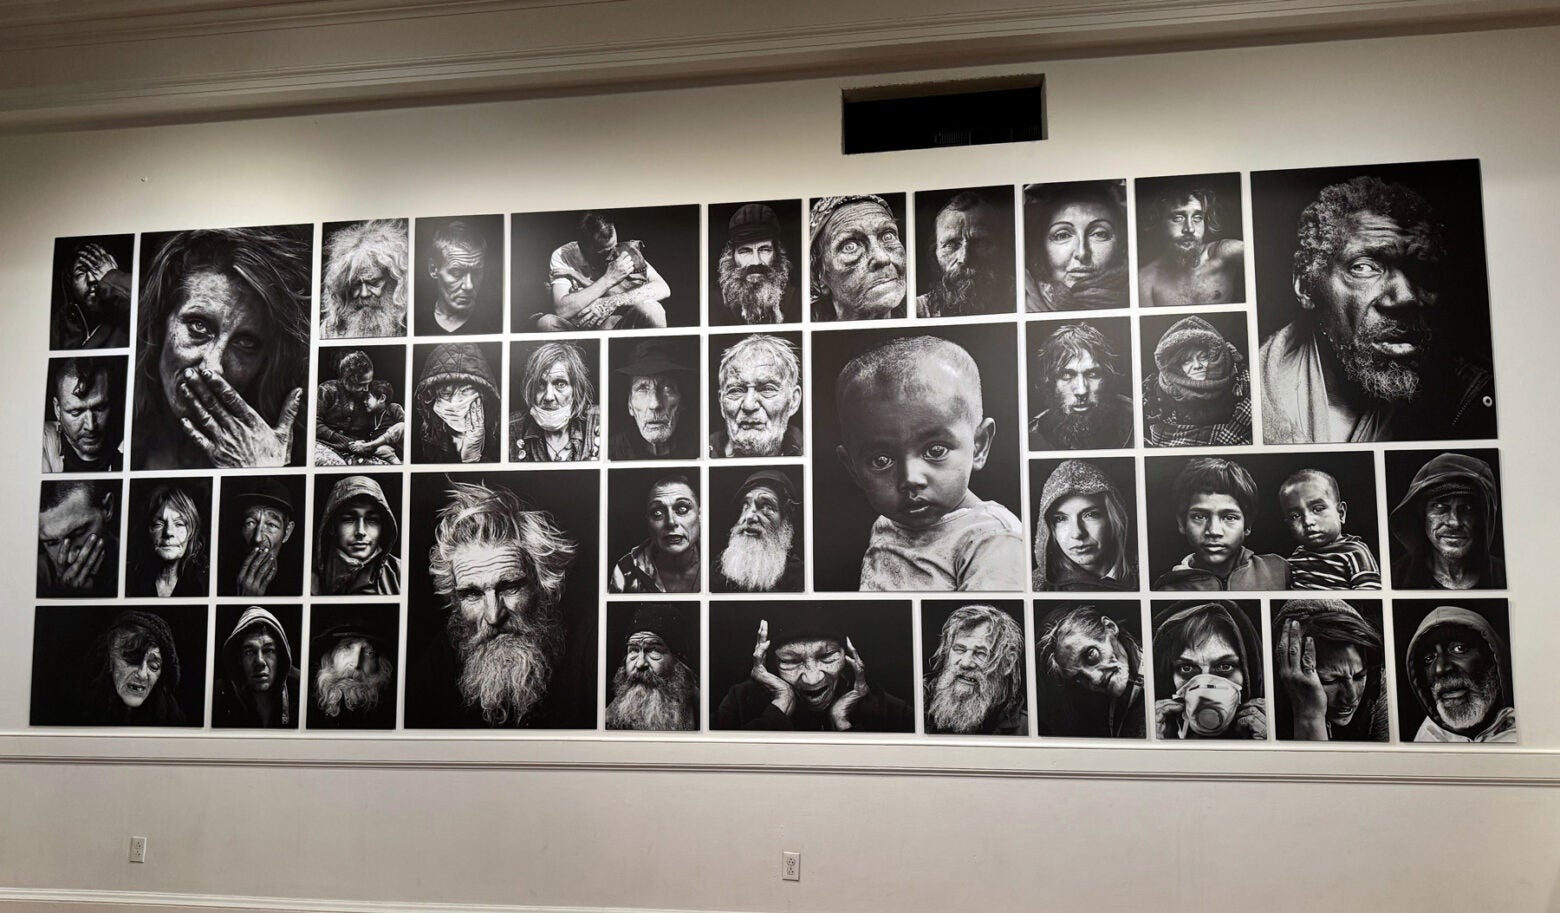 Forty black and white portraits hang on a gallery wall in a grid. The photos are of unhoused people in various expressions.